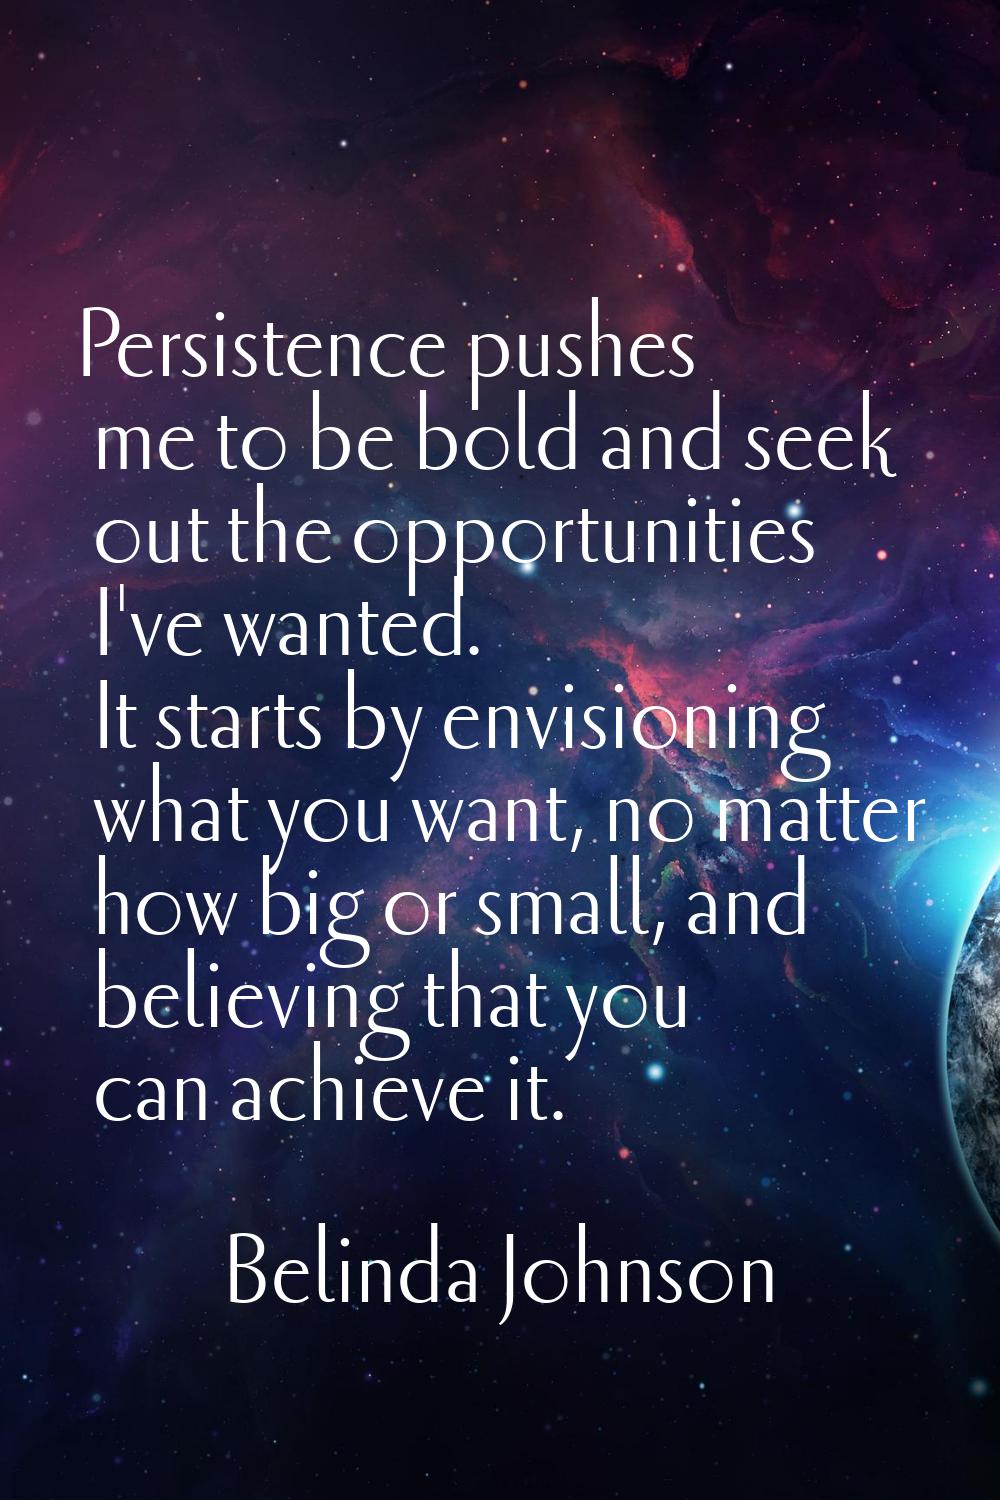 Persistence pushes me to be bold and seek out the opportunities I've wanted. It starts by envisioni